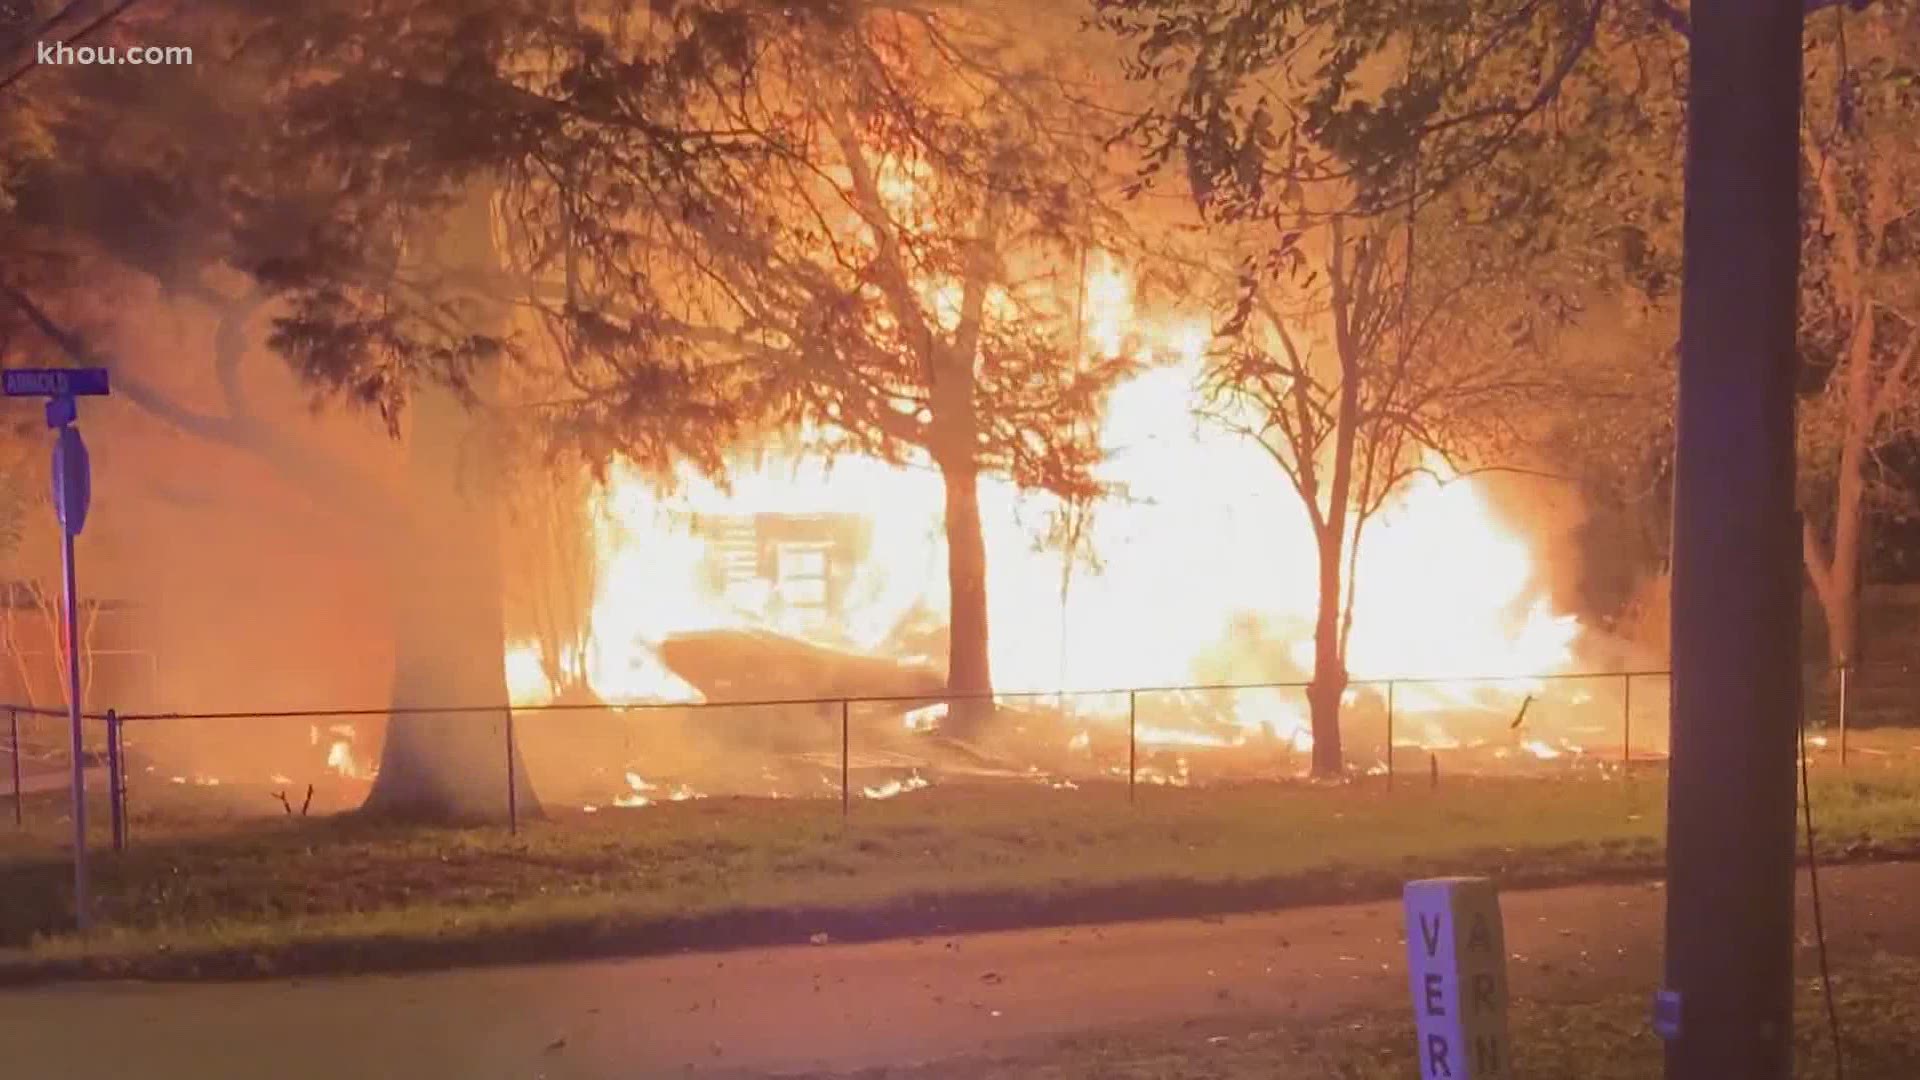 Homes nearly five miles away from the scene were rattled by the explosion, according to officials.